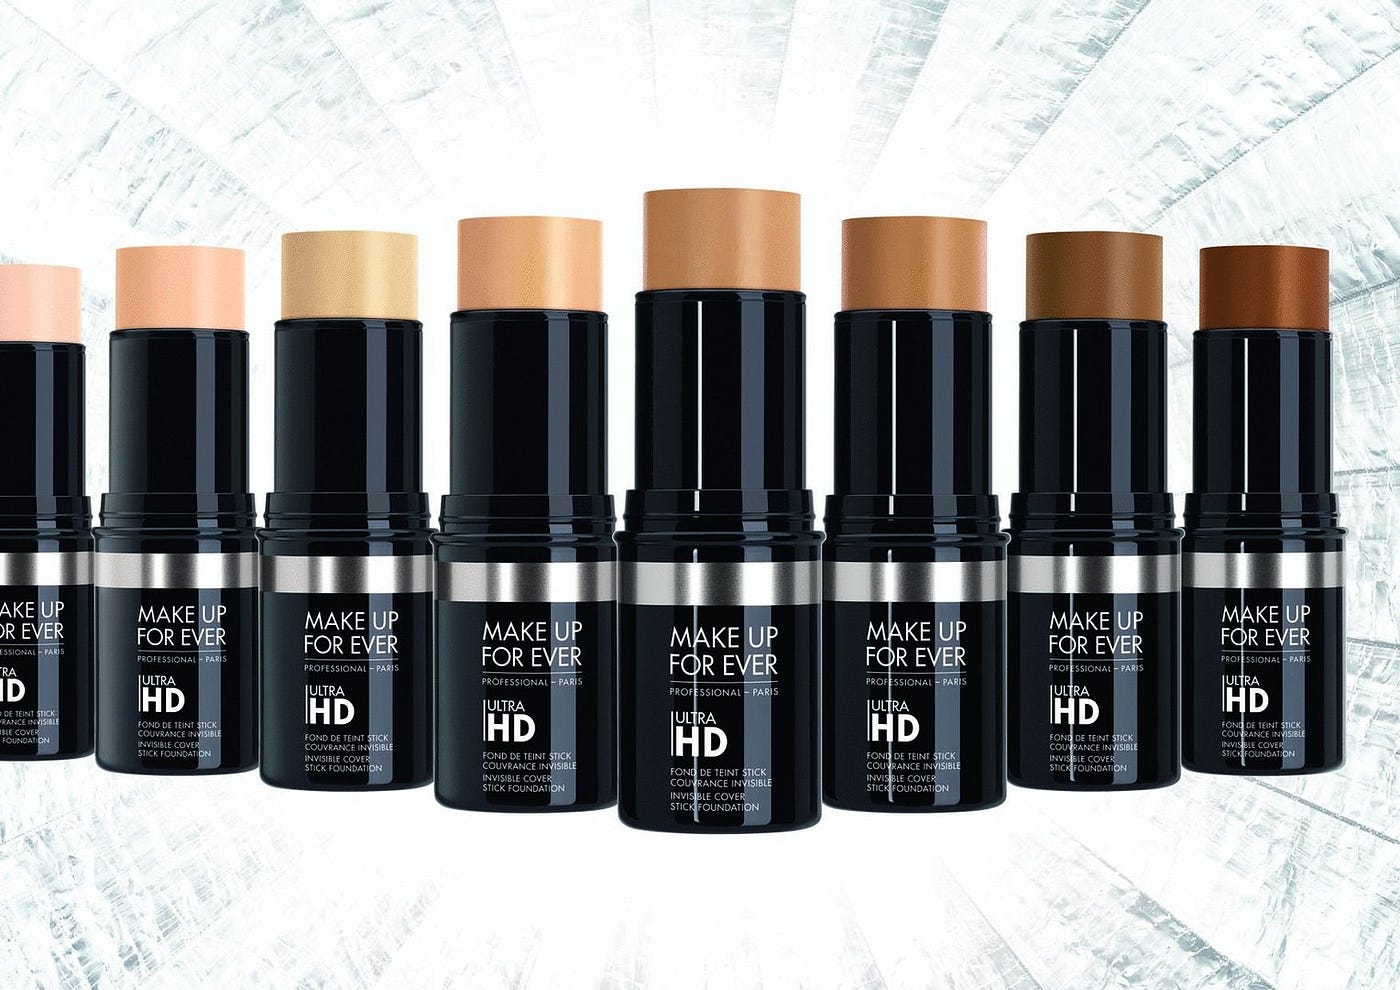 Makeup Forever Ultra HD Invisible Cover Stick Foundation-A Review